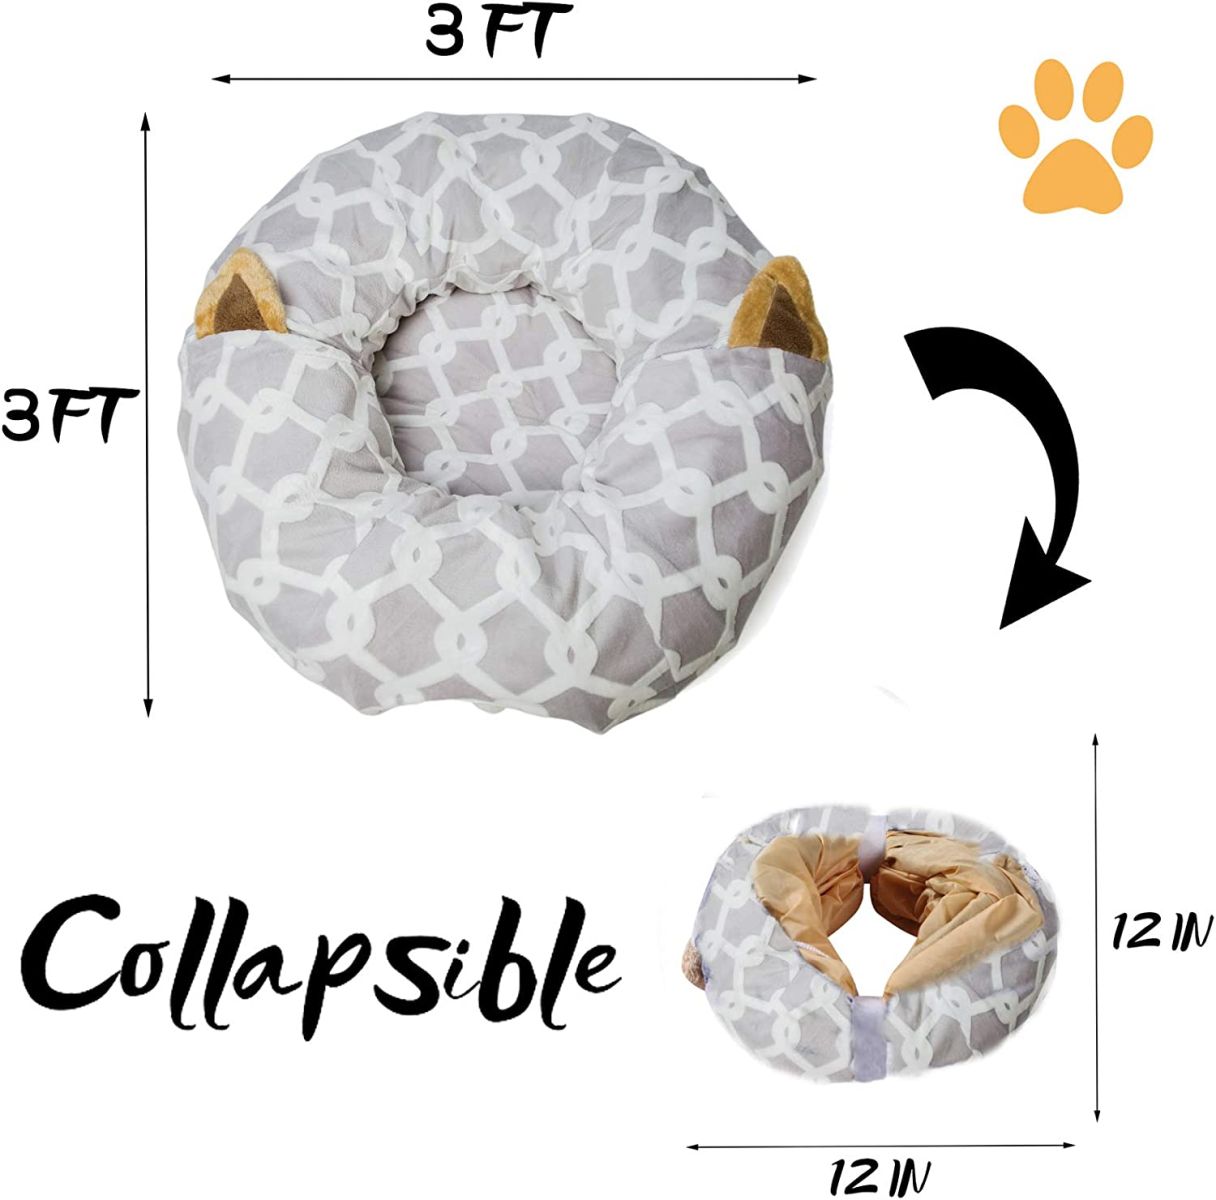 LUCKITTY Large Cat Tunnel Bed with Plush Cover,Fluffy Toy Balls, Small Cushion and Flexible Design- 10 inch Diameter, 3 ft Length- Great for Cats, and Small Dogs, Gray Geometric Figure